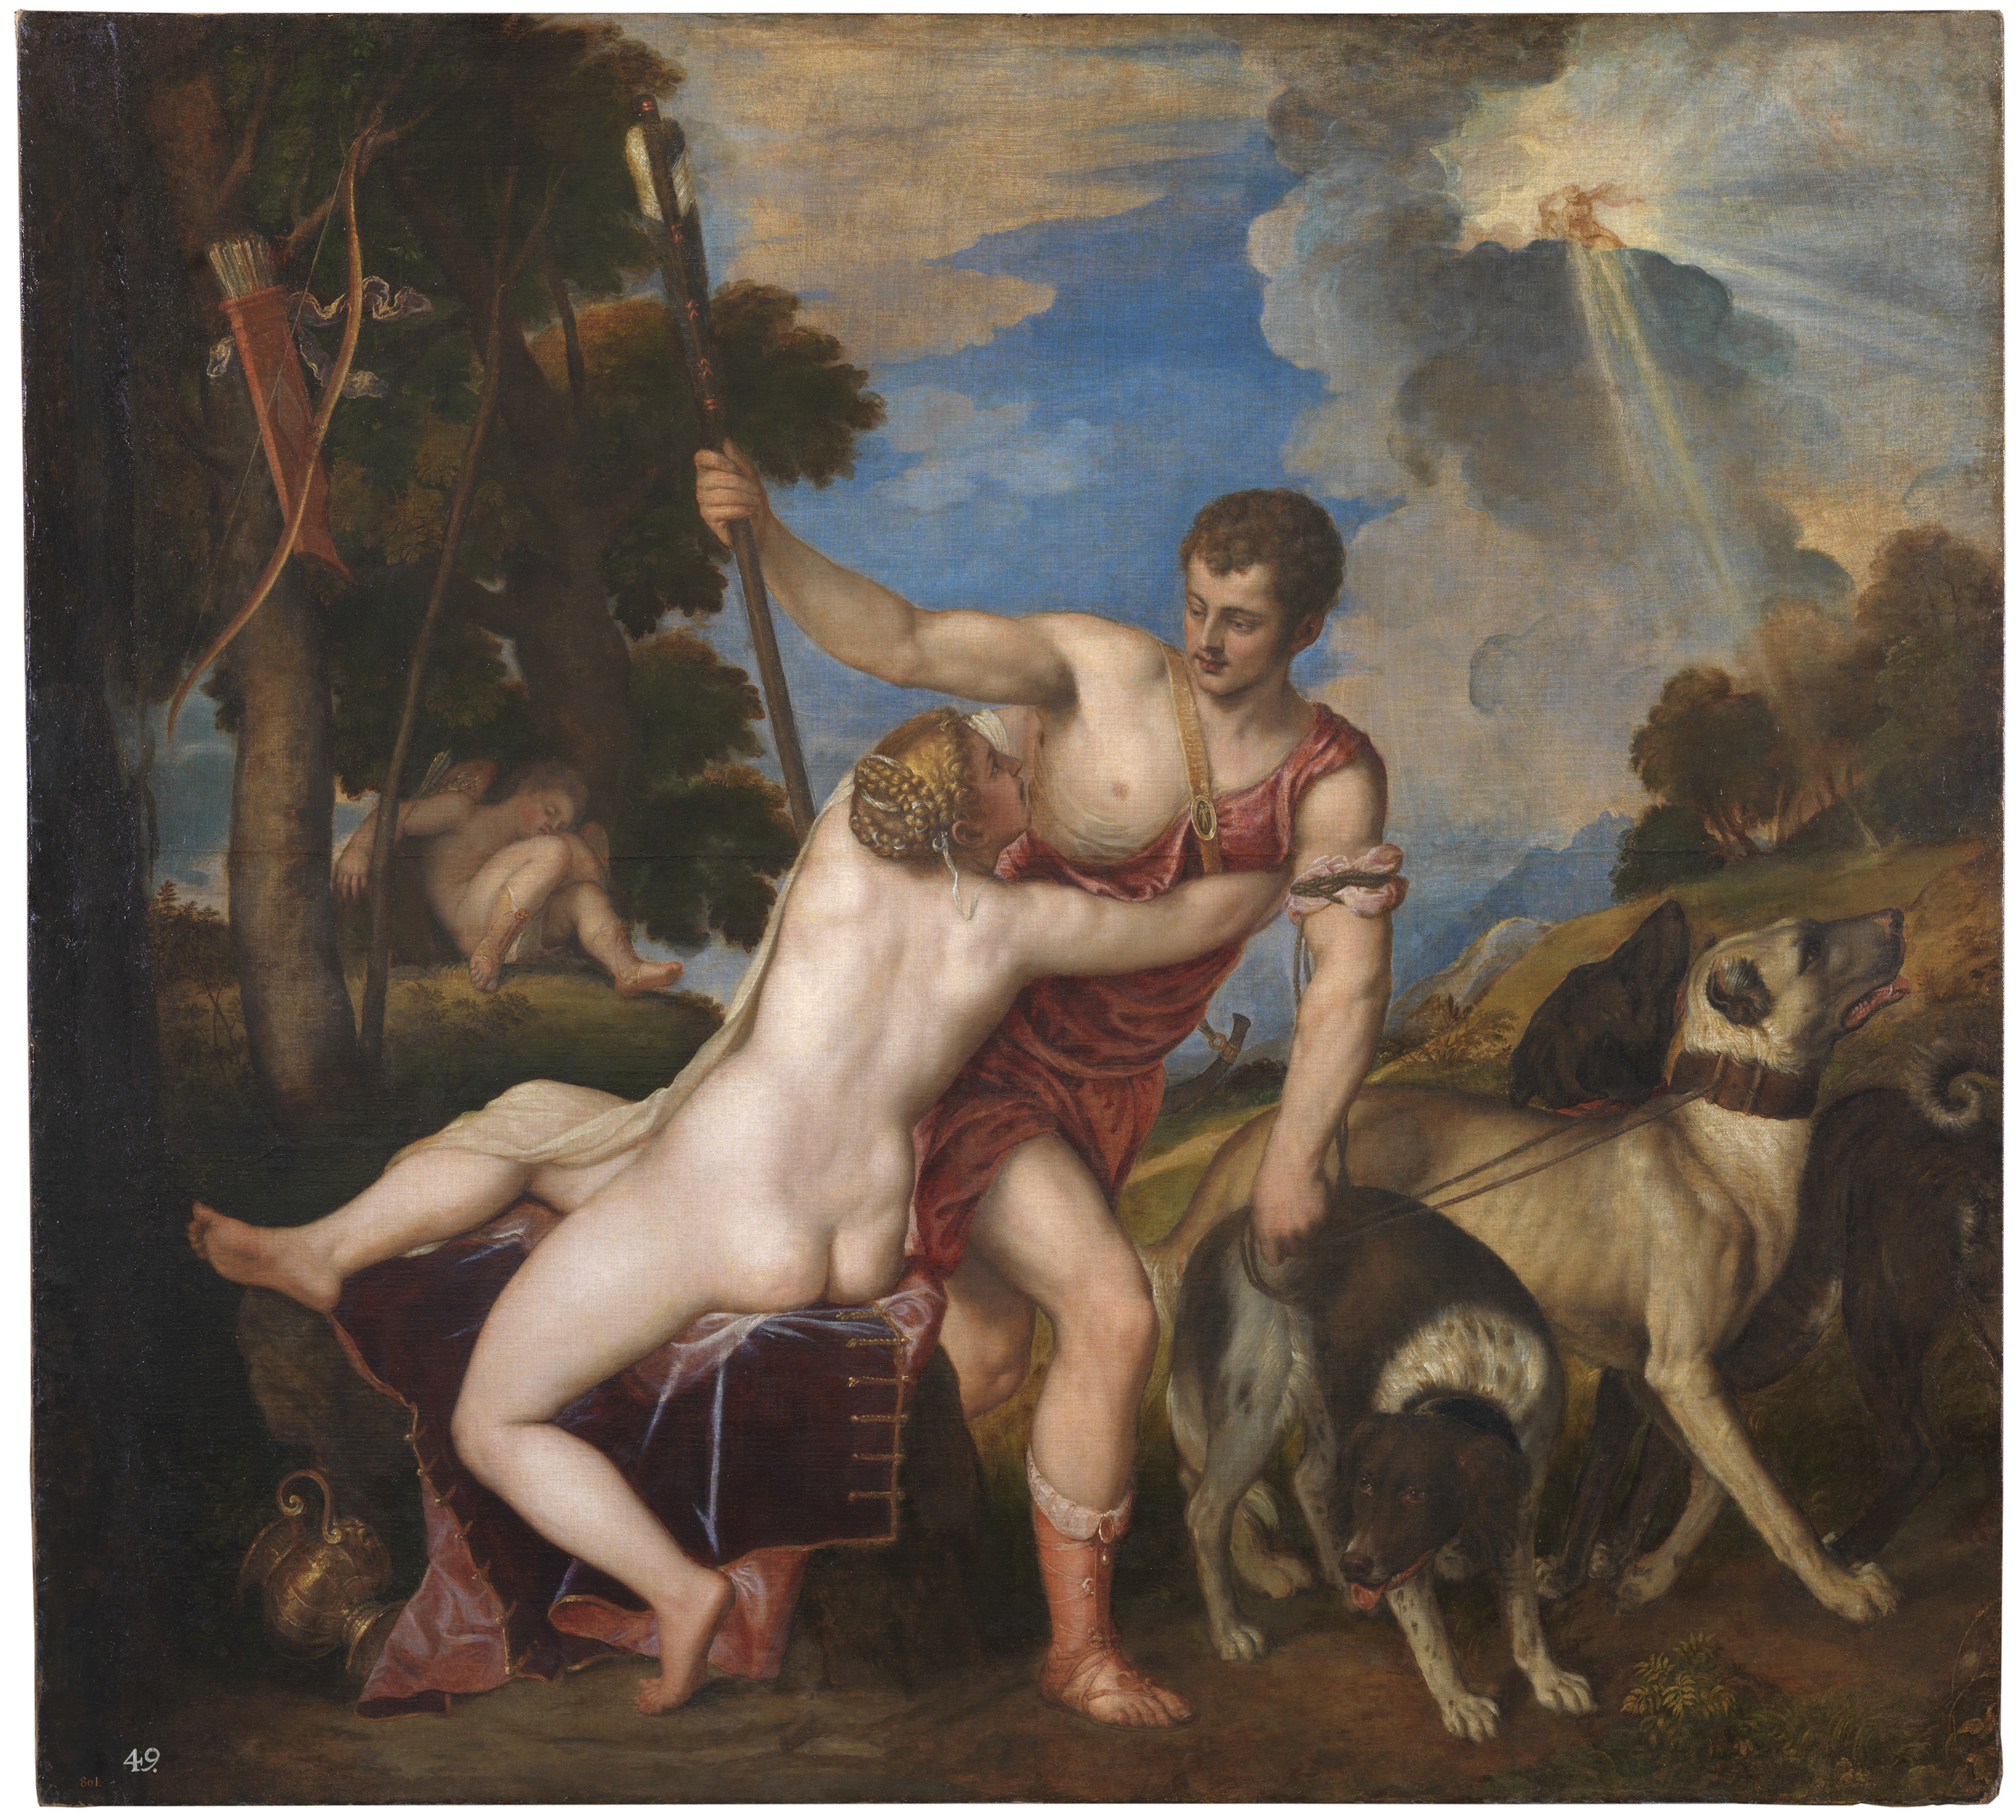 Venus and Adonis (1554) by Titian